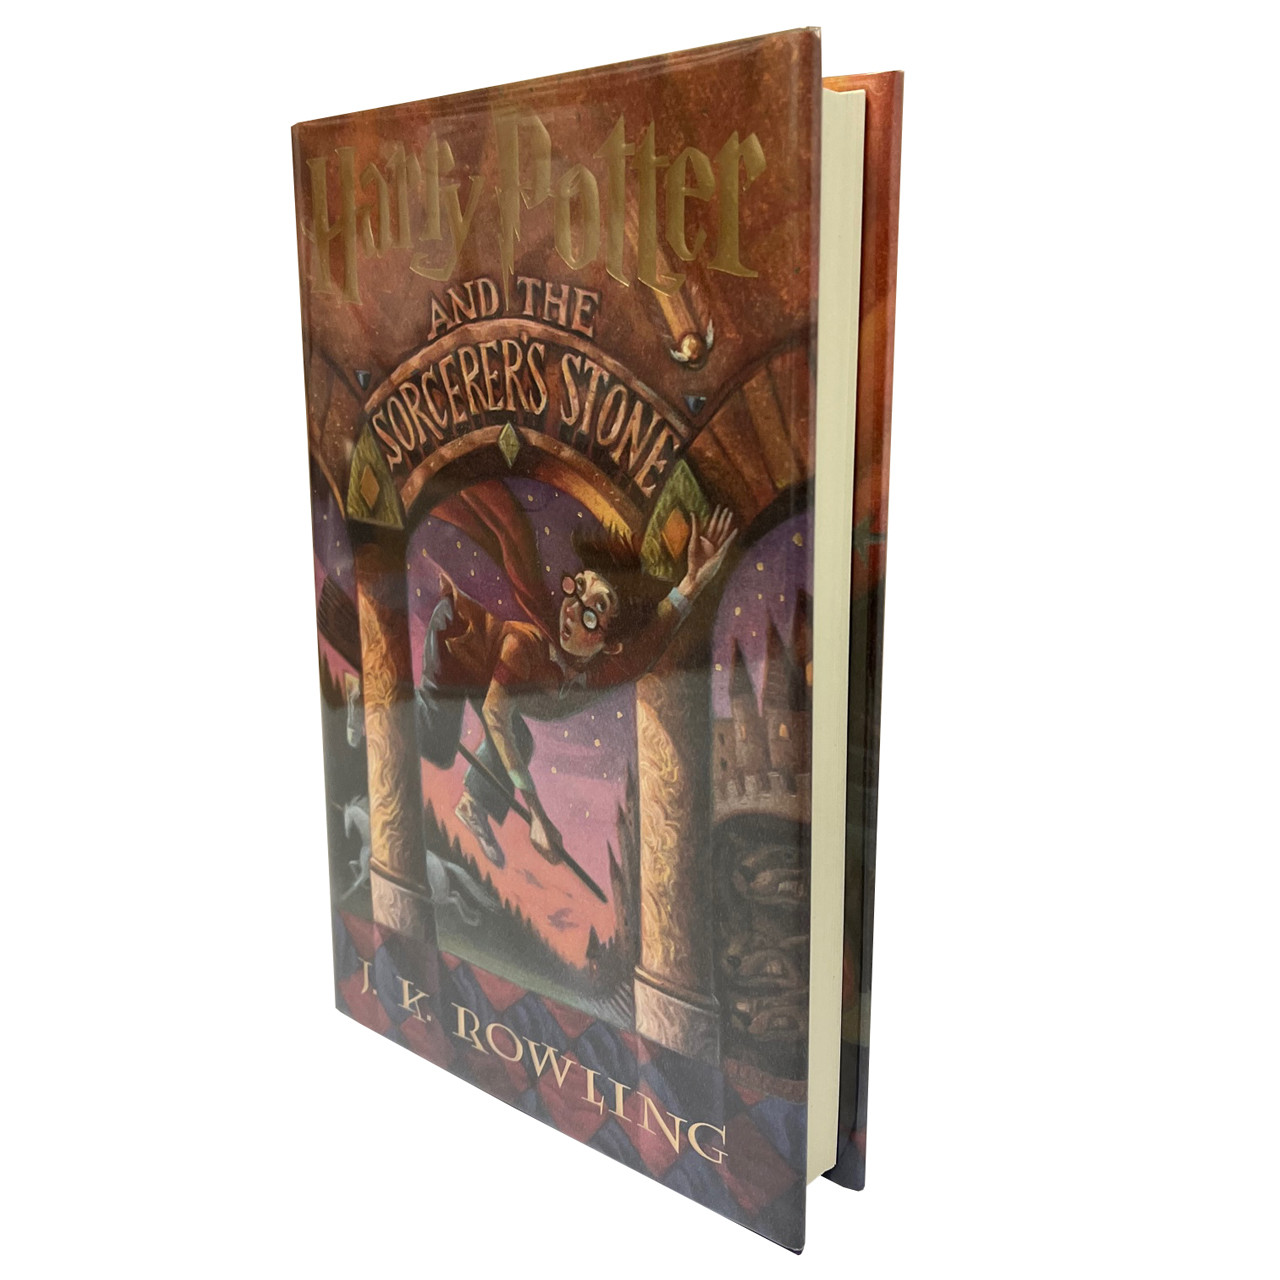 J.K. Rowling "Harry Potter and the Sorcerer's Stone" Traycased Signed First Edition/Later Printing W/COA , Provenance from Book Signing Event [Fine/Fine]